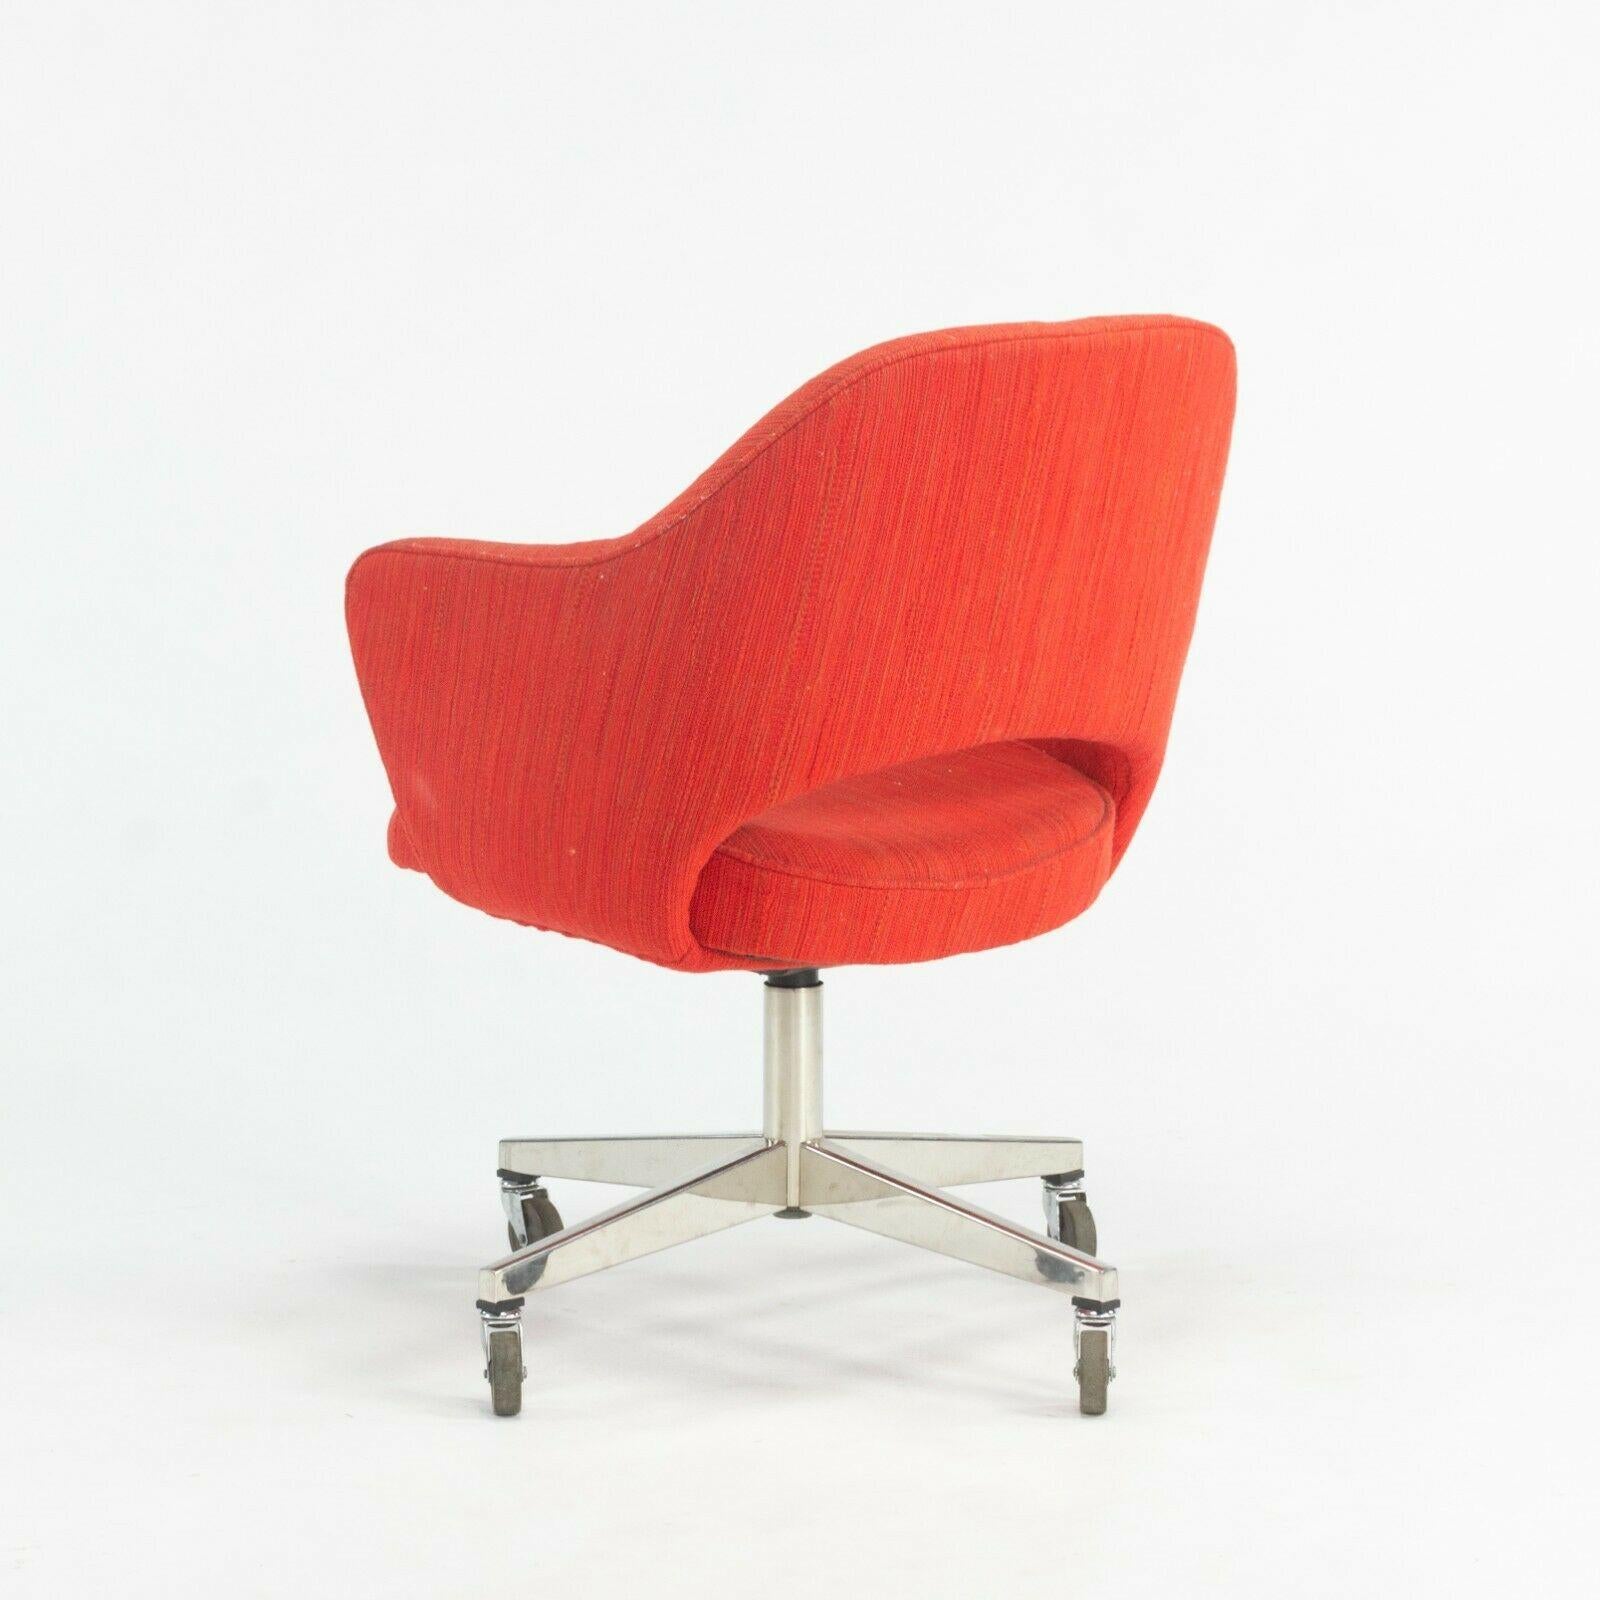 1974 Eero Saarinen for Knoll Rolling Executive Office Chairs Original Red Fabric For Sale 1